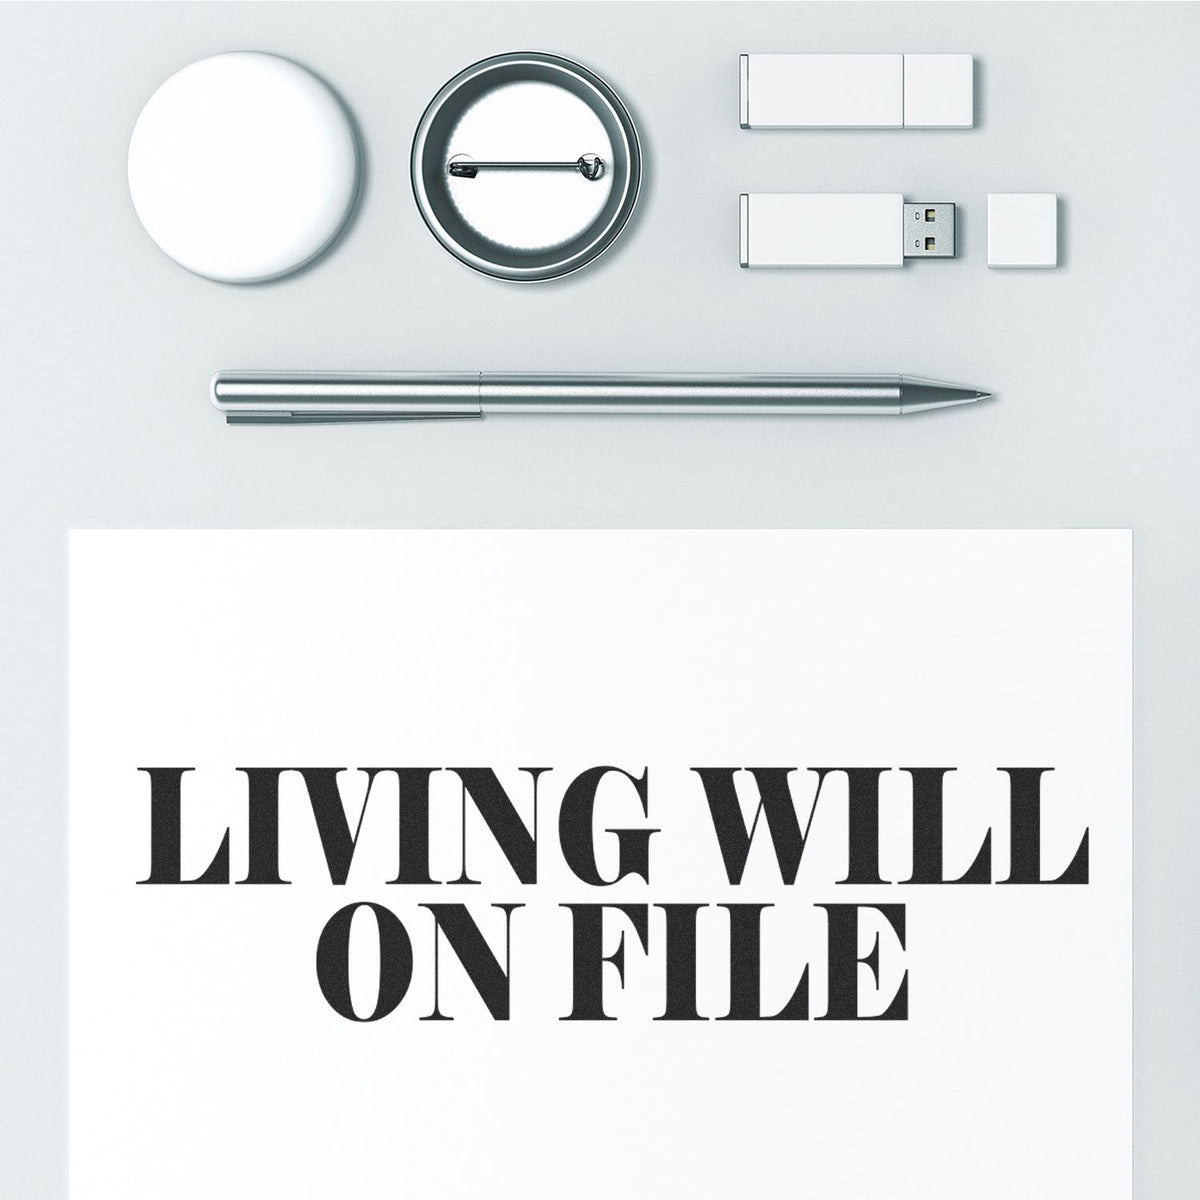 Large Living Will On File Rubber Stamp Lifestyle Photo